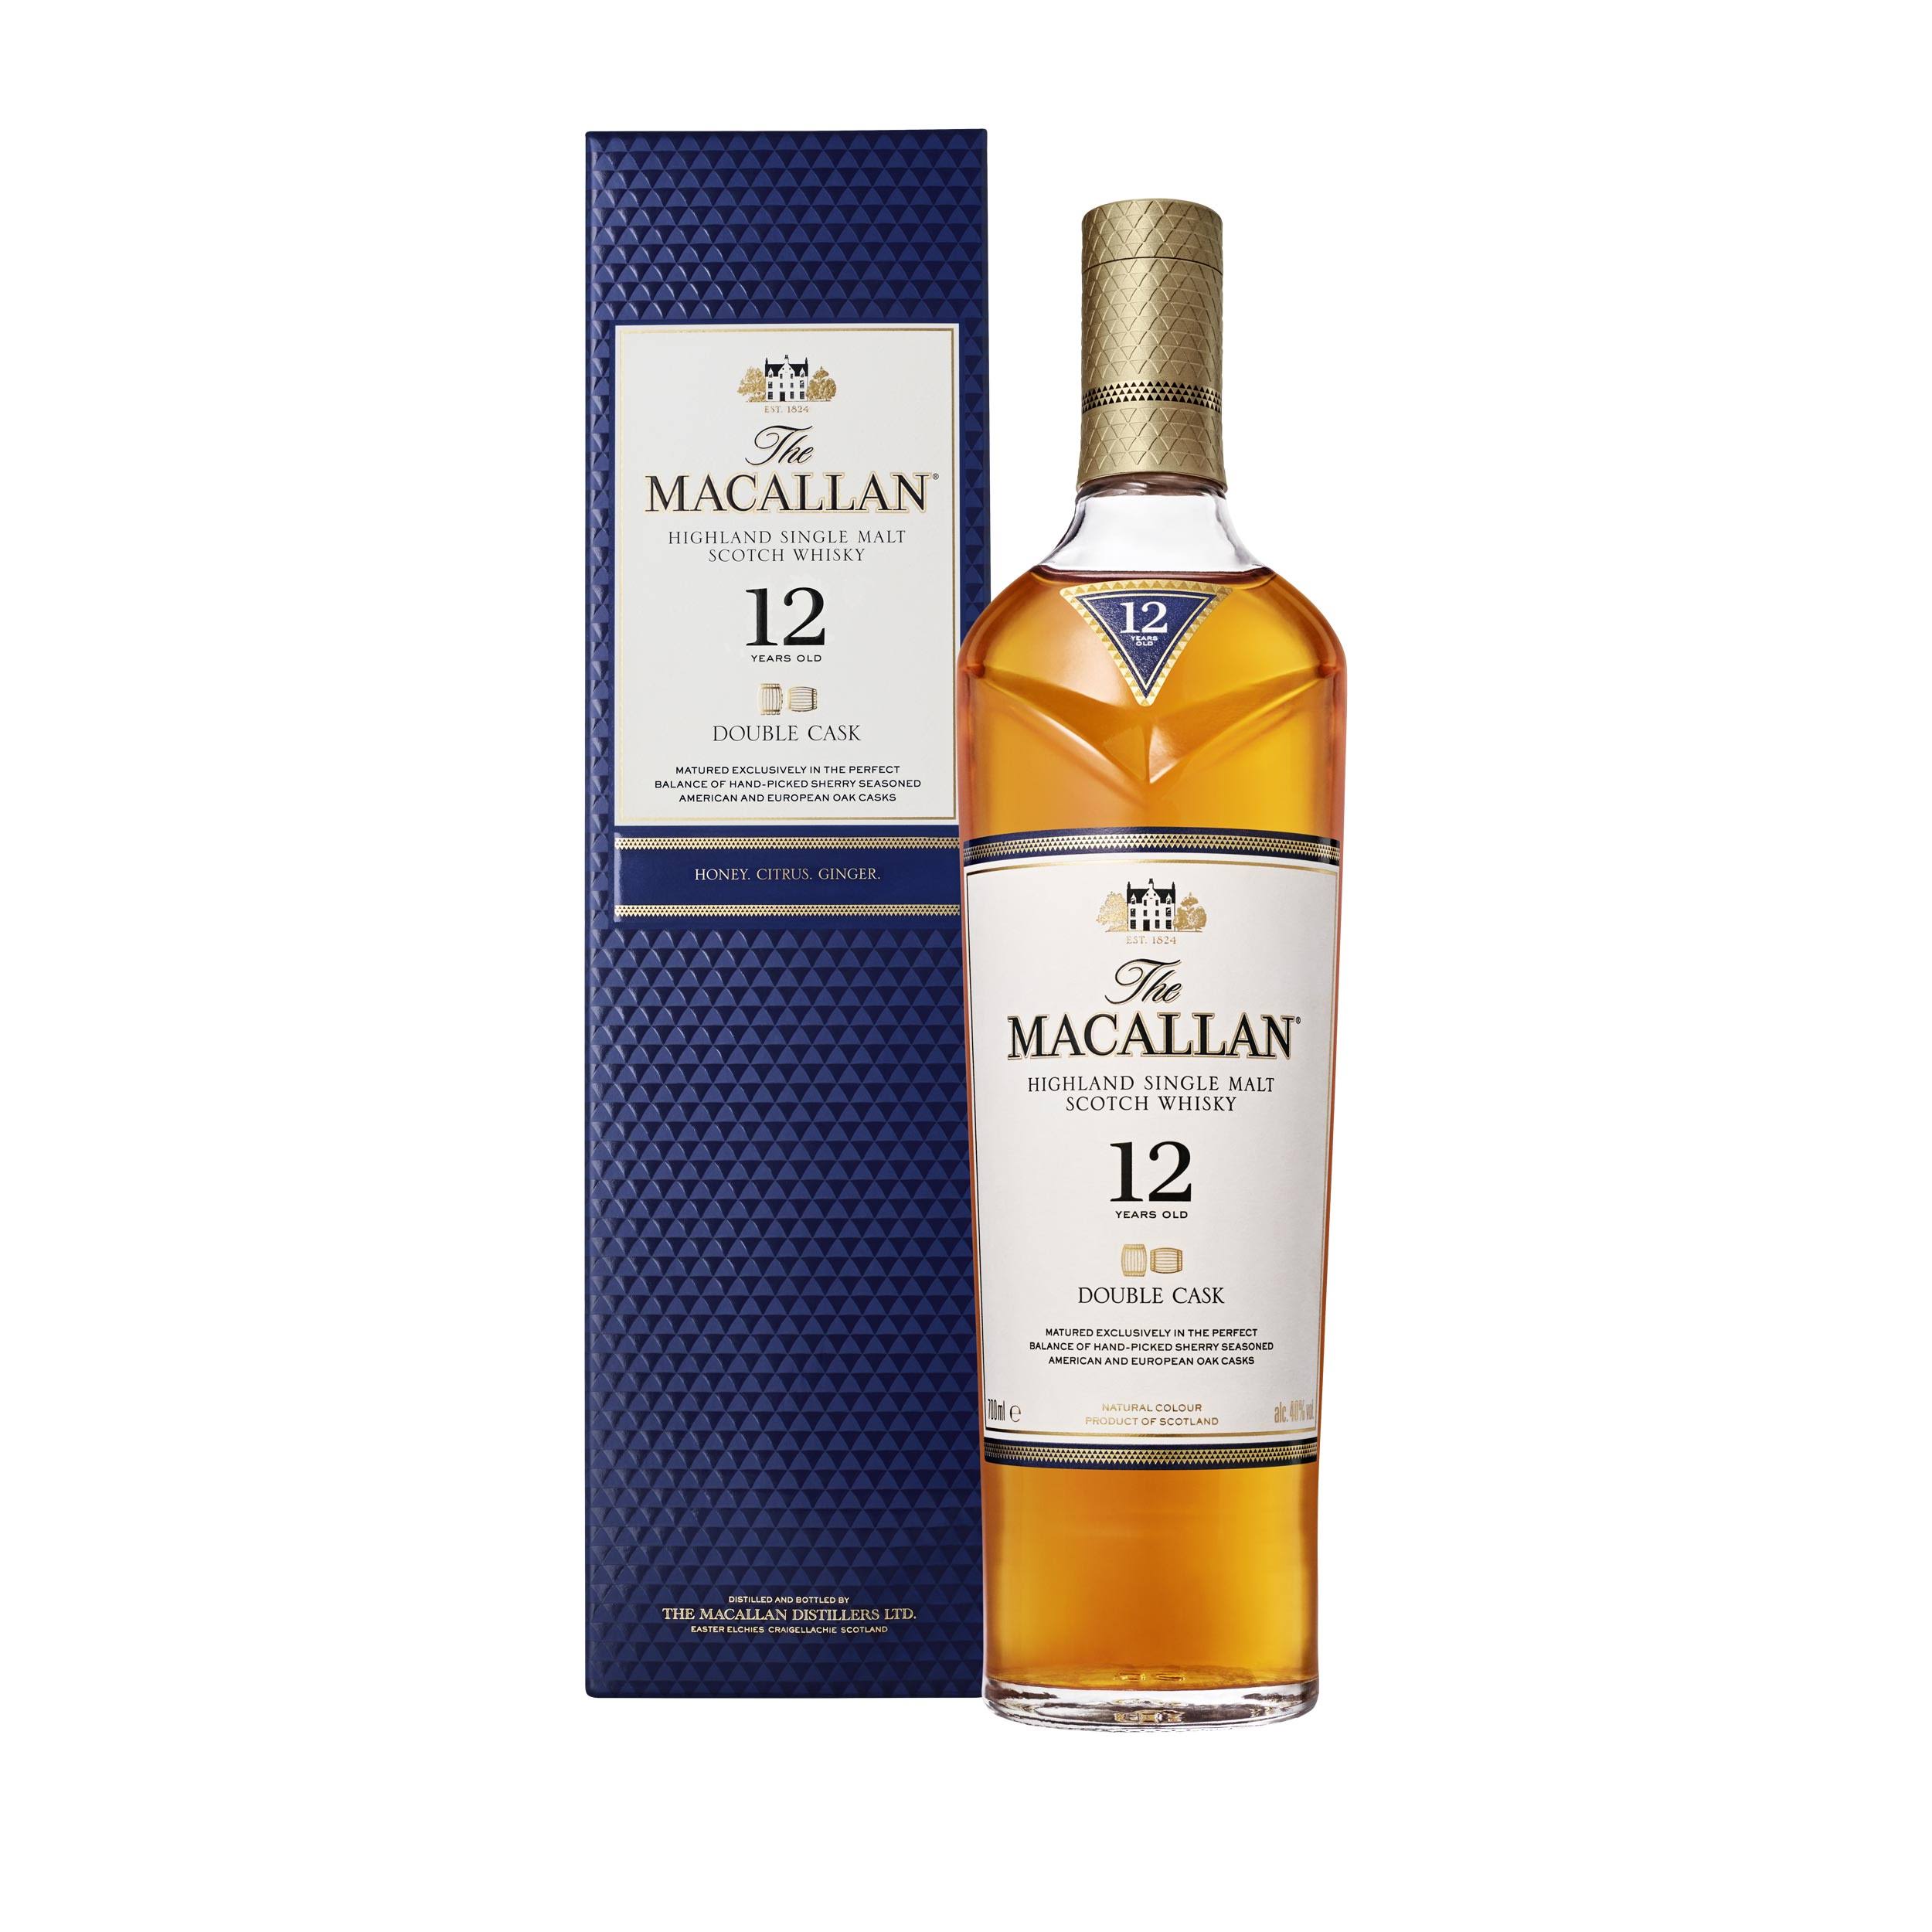 The Macallan Double Cask Scotch Whisky - 70cl